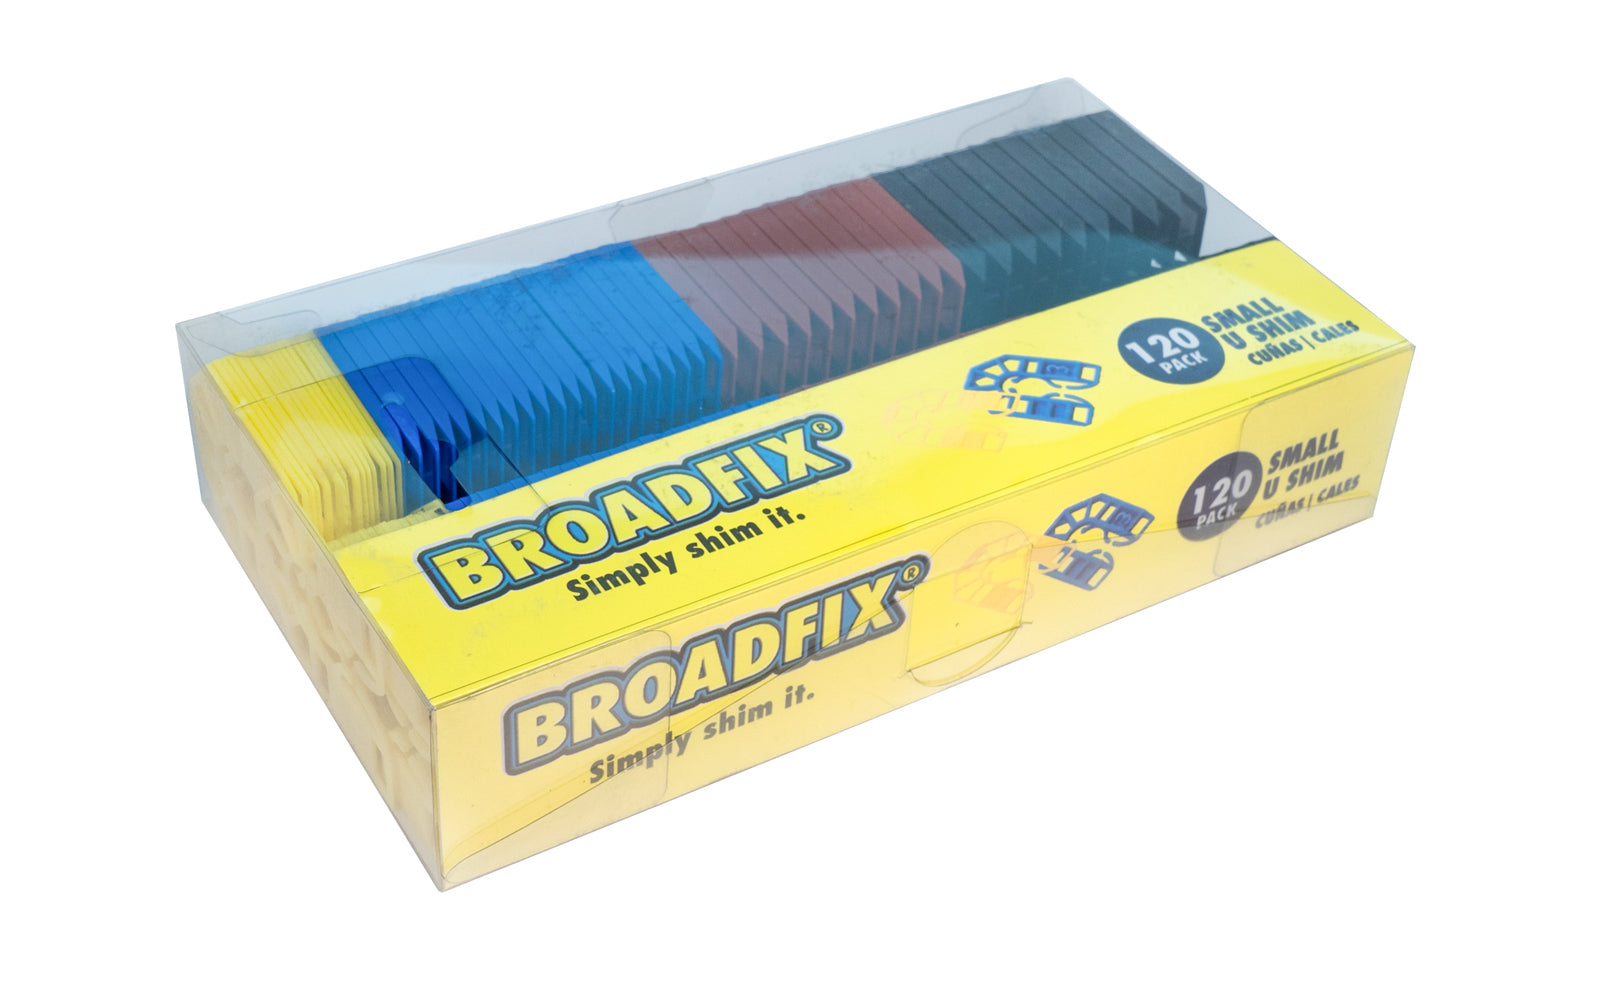 These 2-1/8" x 1-3/4" plastic standard U shims by Broadfix are great for a variety of applications. Use for doors, windows, cabinets, countertops, leveling appliances, floors, craft projects etc. 120 pack bundle. Includes the following sizes: 1/32" (1 mm), 1/8" (3 mm), 3/16" (5 mm), 1/4" (6 mm). 5060172010899